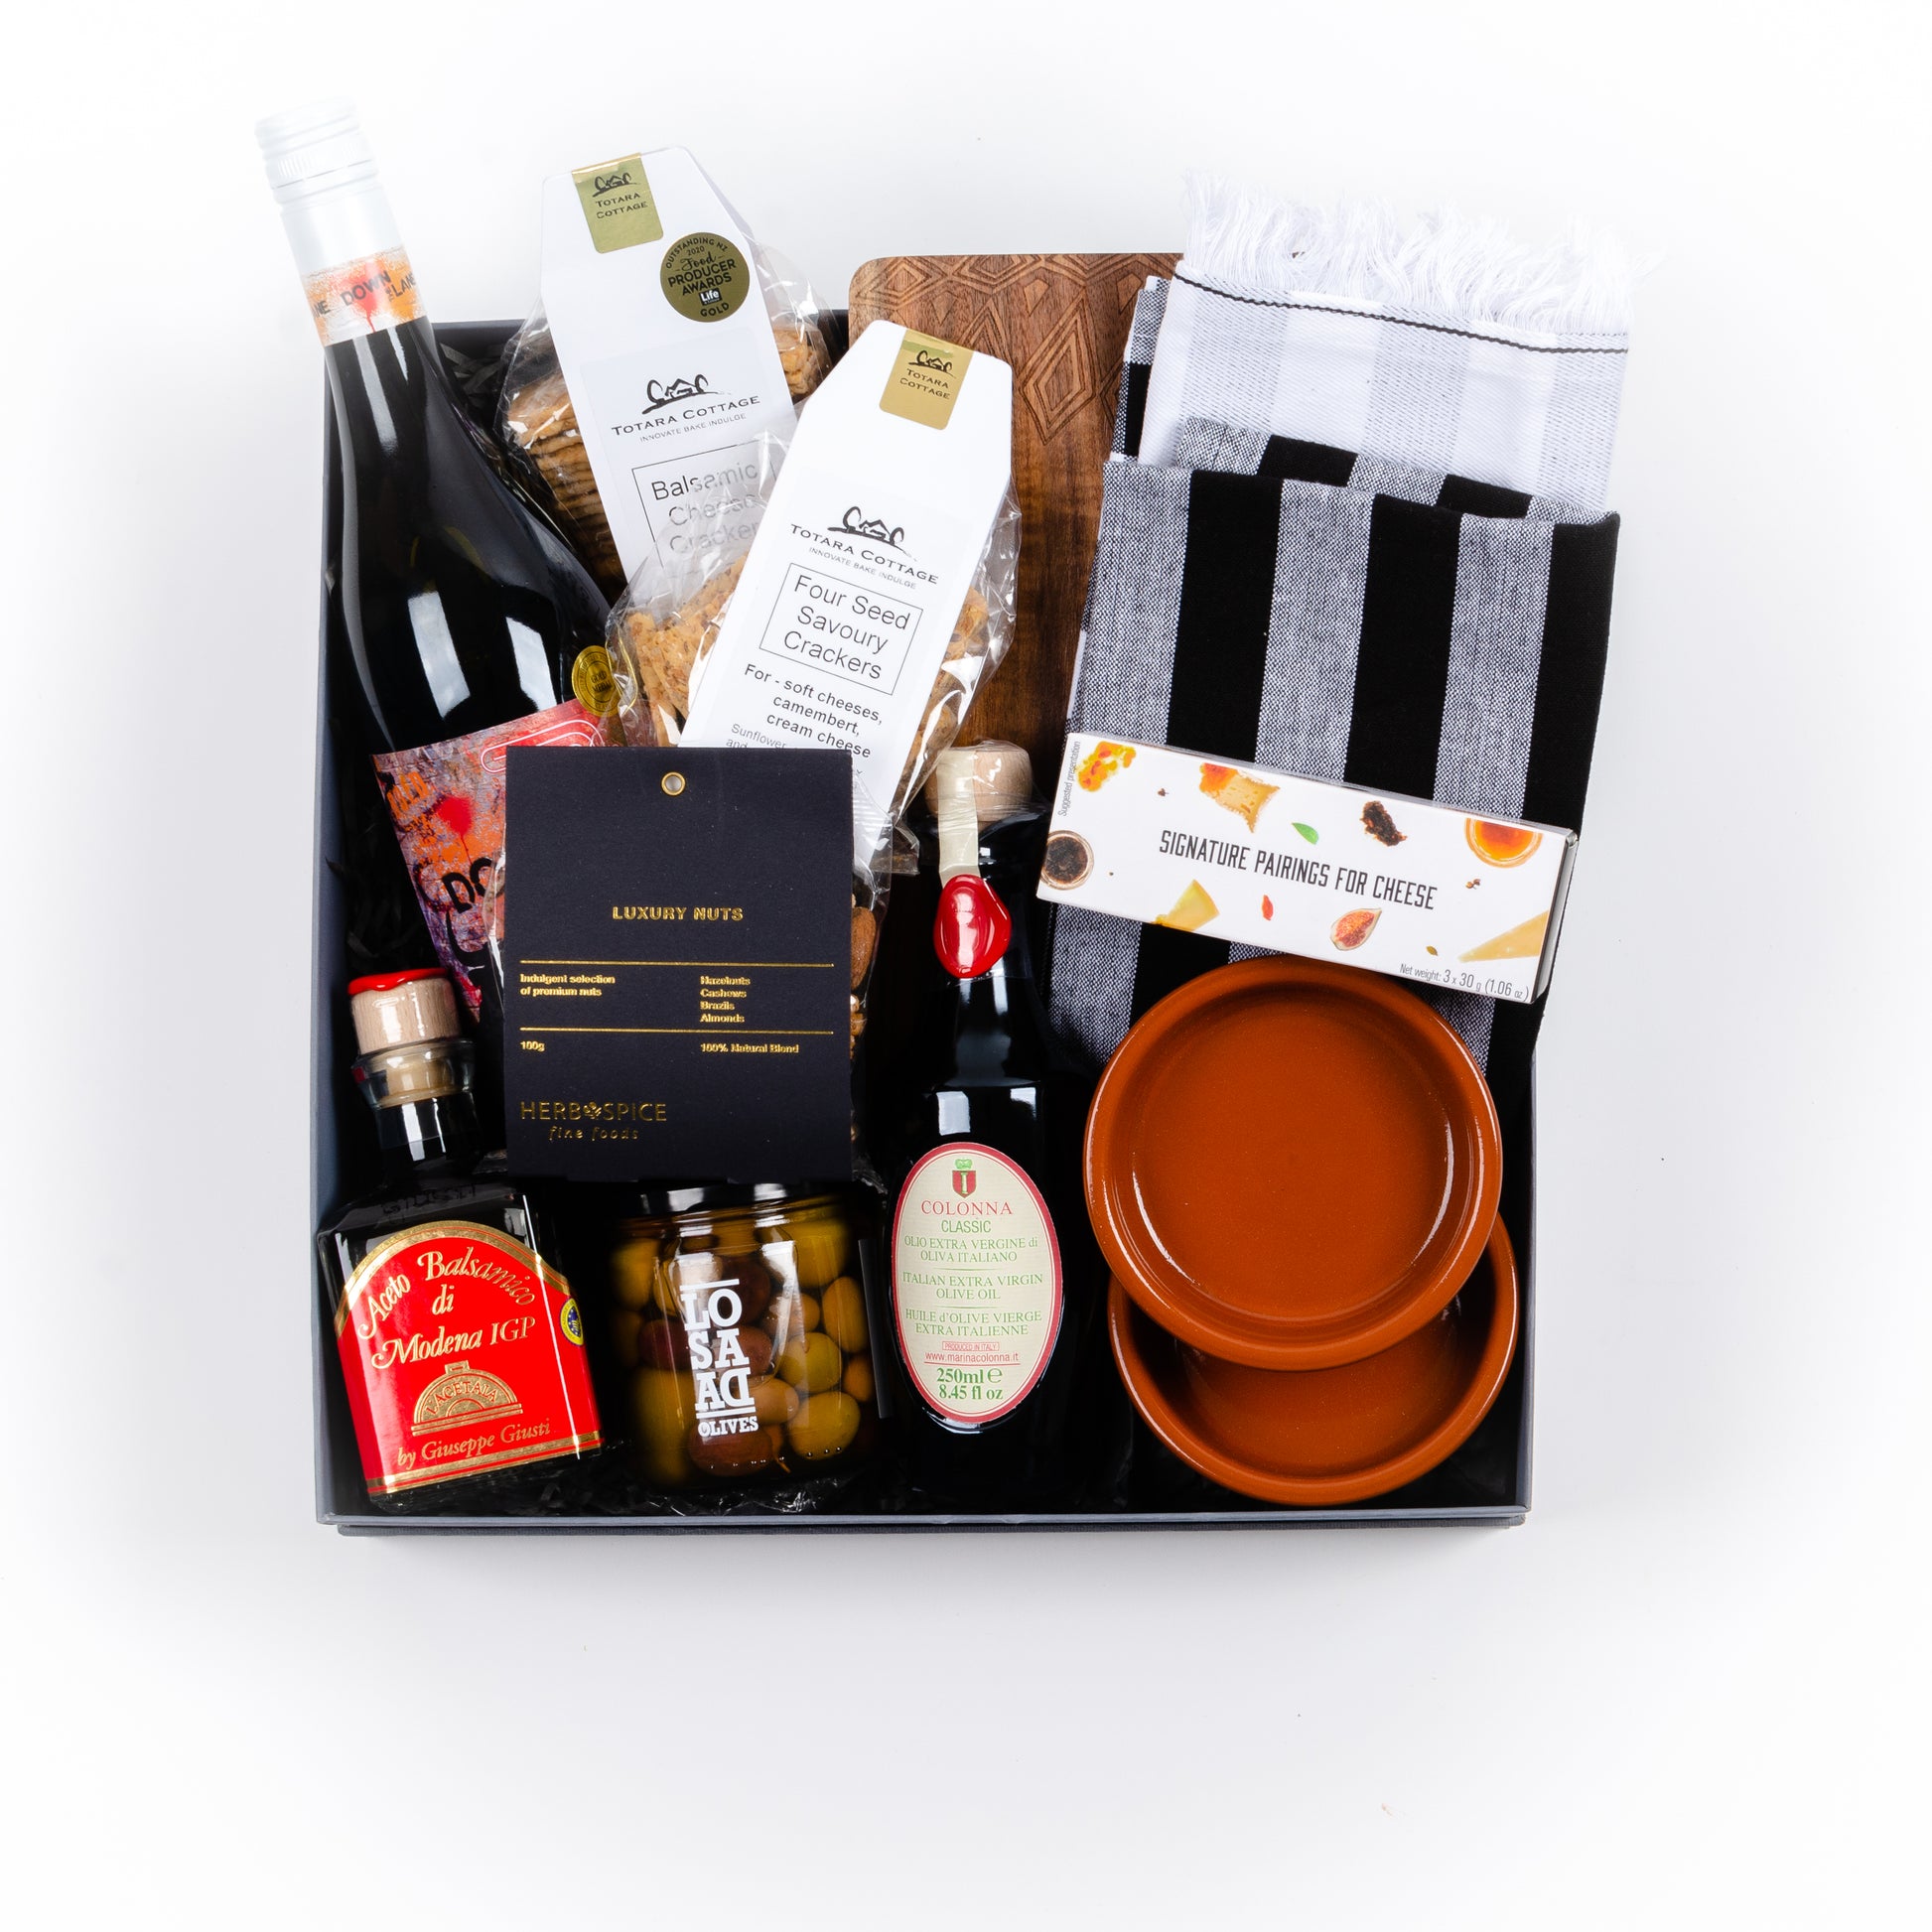 Gift box includes wooden board, two tea towels, two tapas dishes, two crackers, nuts, cheese jellies, olives, olive oil, balsamic vinegar, red wine.